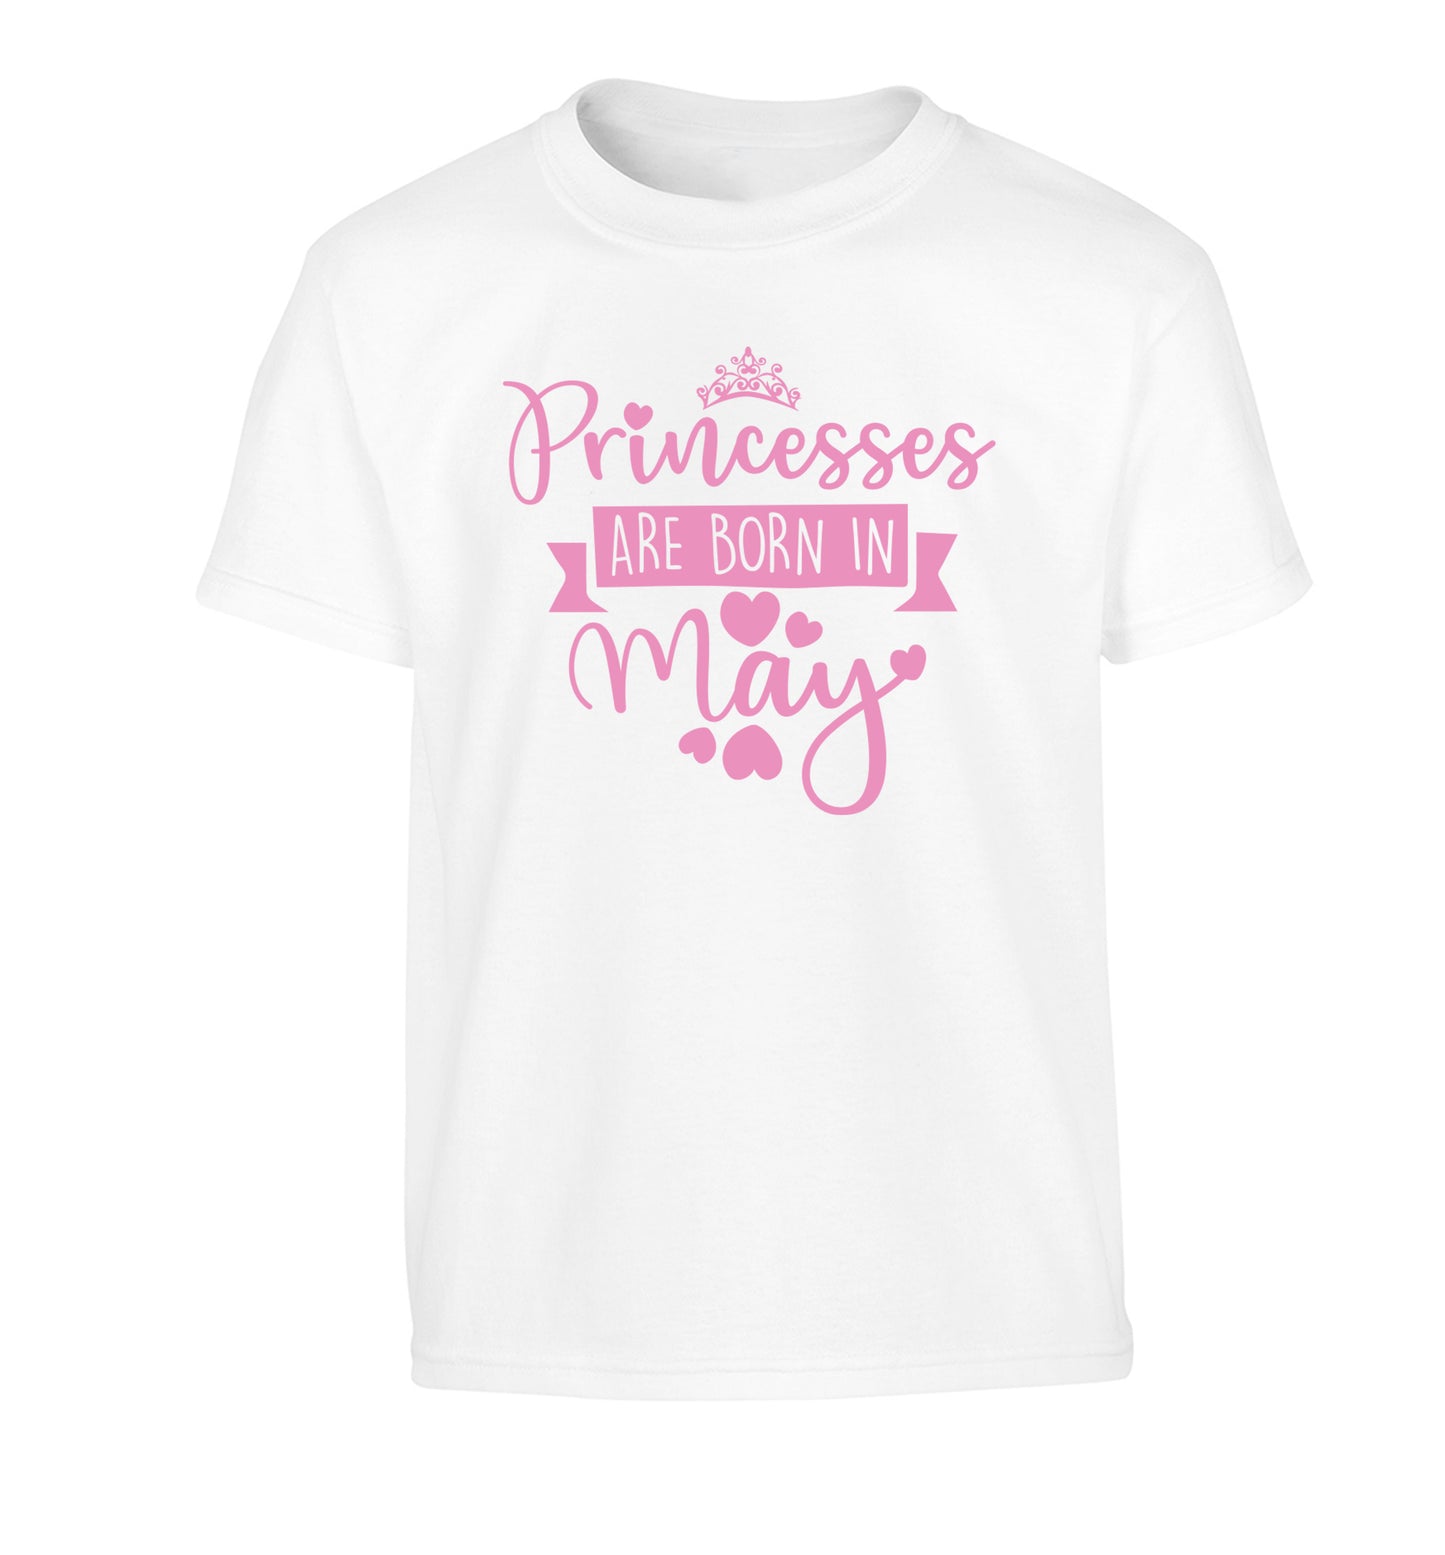 Princesses are born in May Children's white Tshirt 12-13 Years